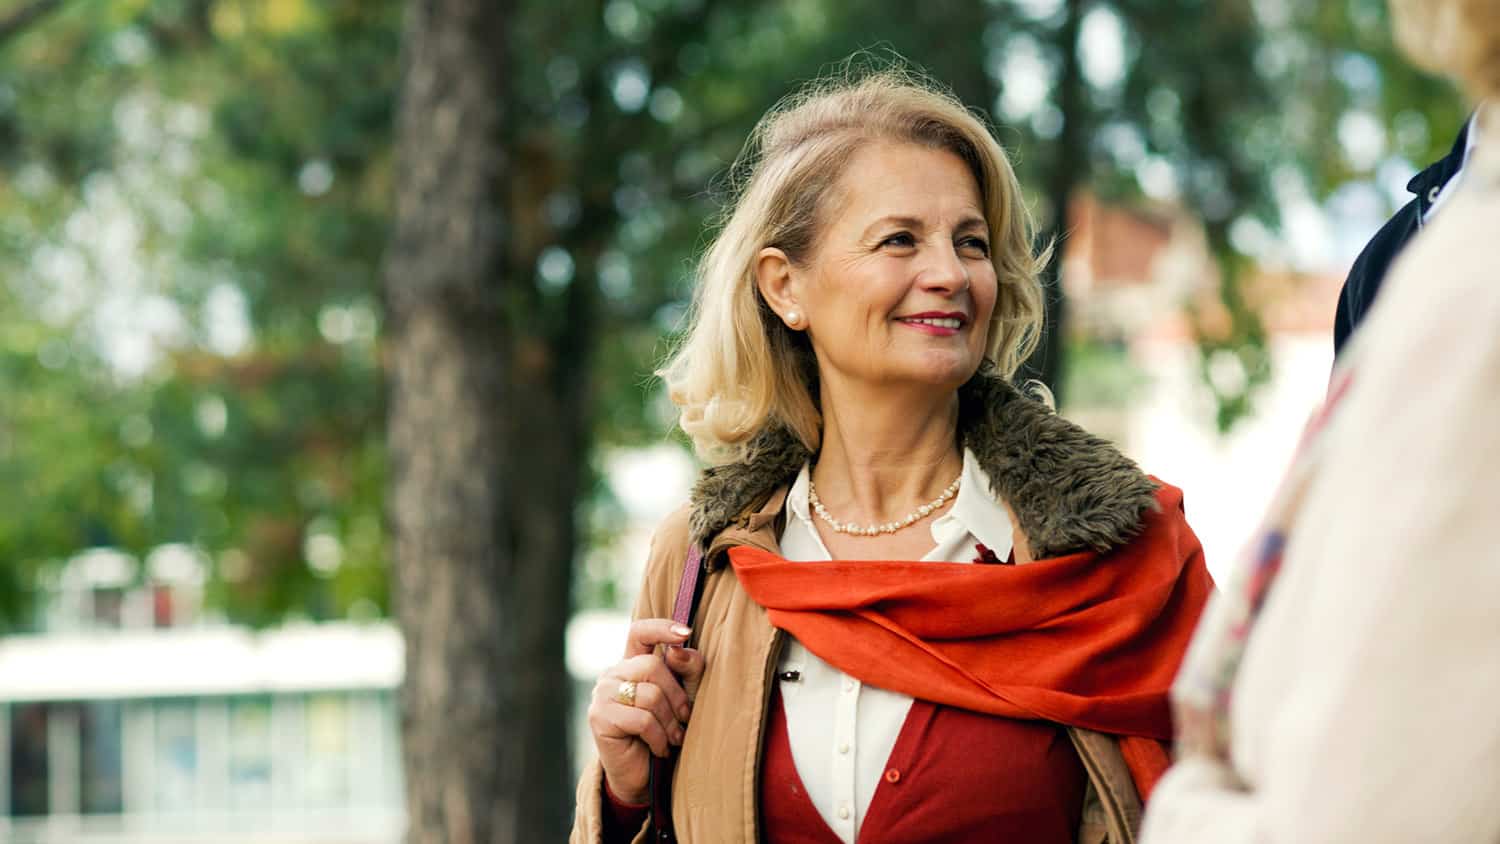 fashion for women over 60